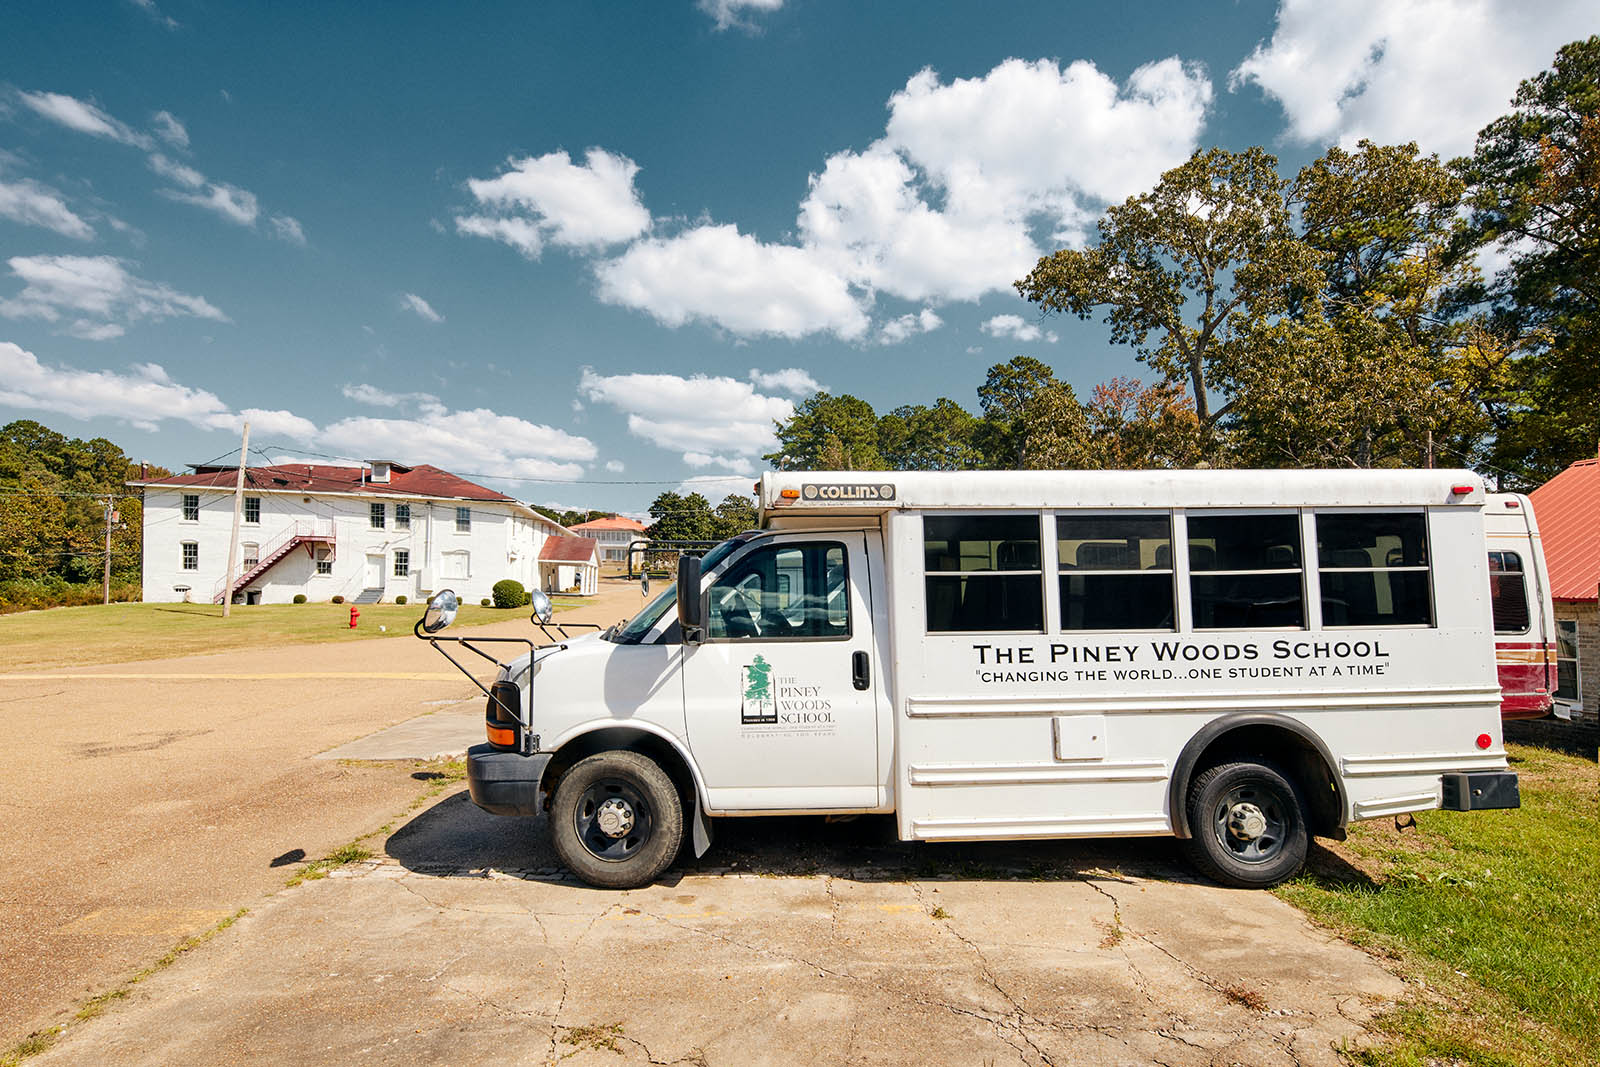 Photo of a white mini school bus with words "The Piney Woods school" words on it